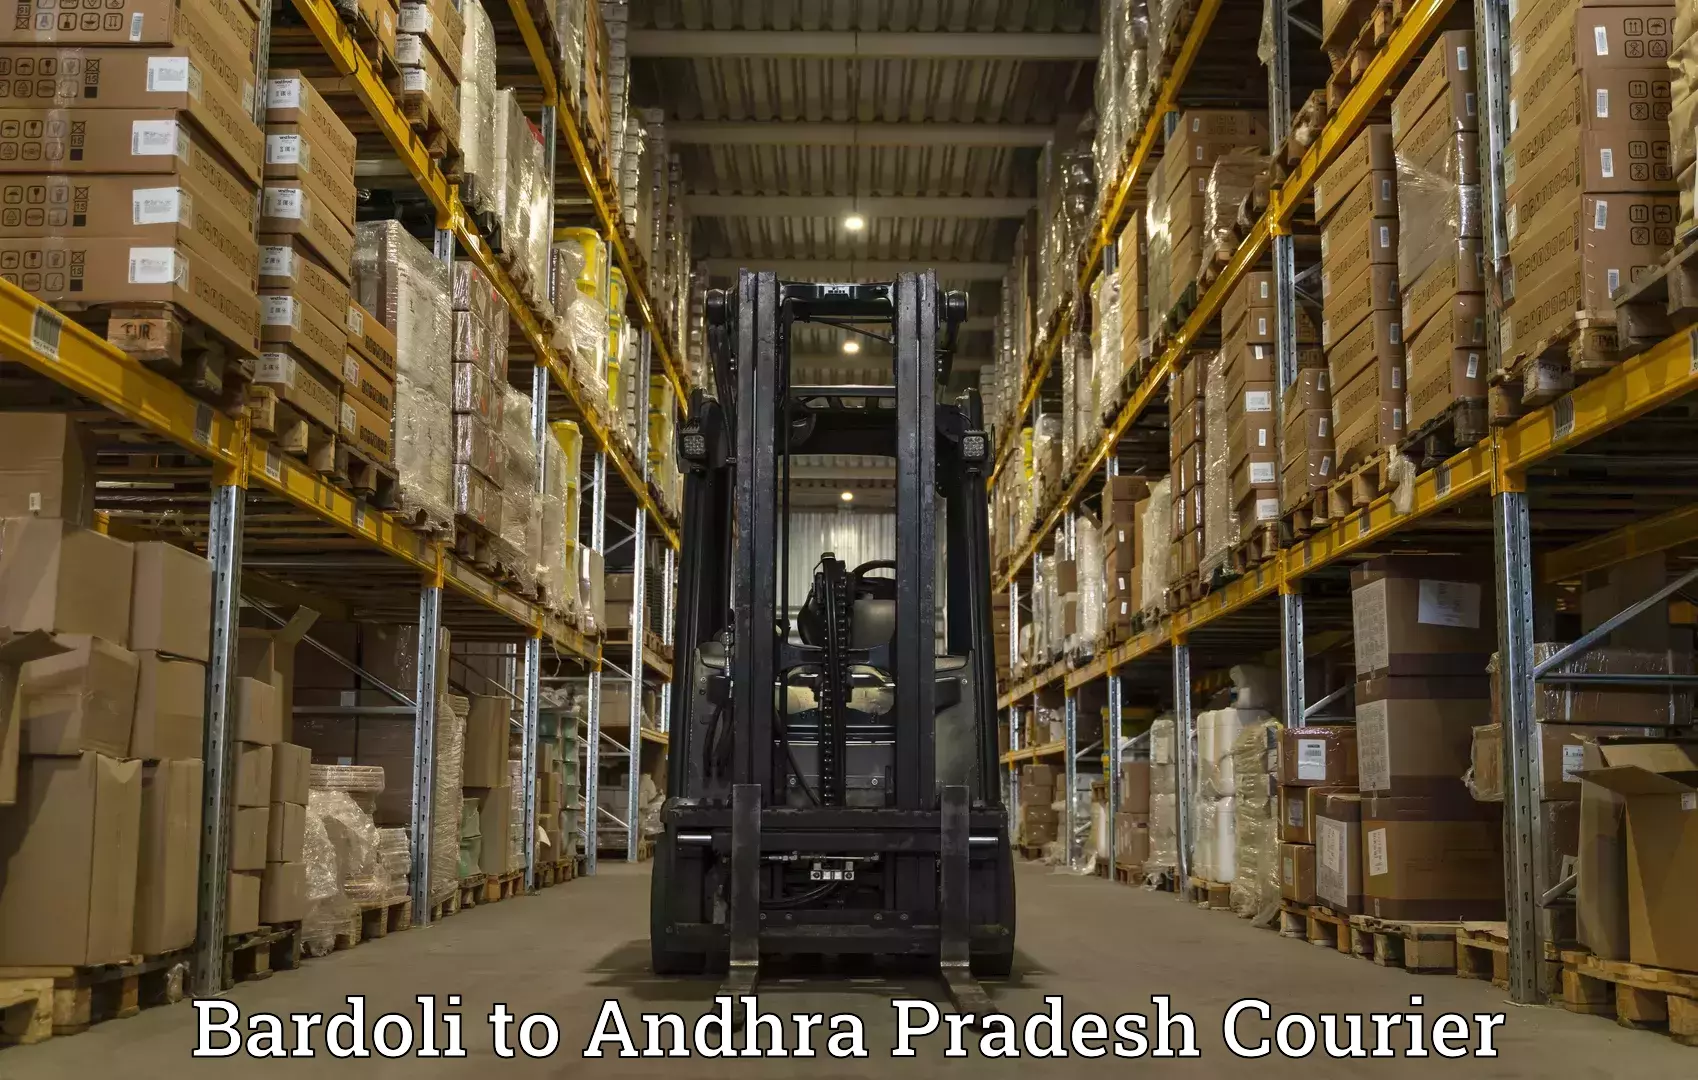 Ocean freight courier Bardoli to Pulivendula